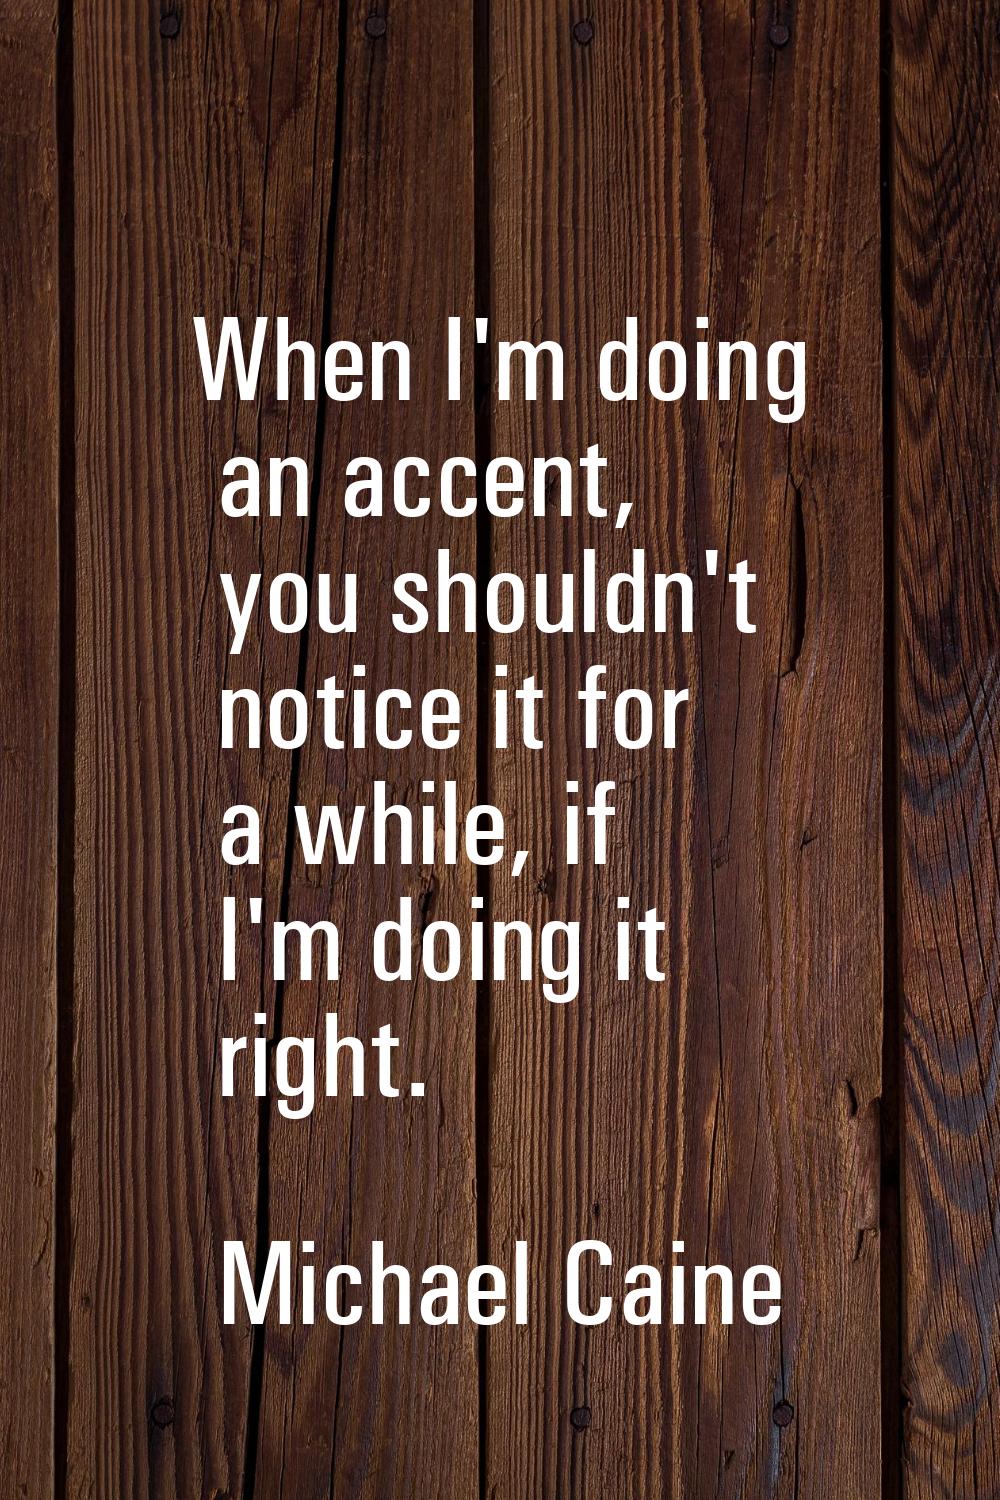 When I'm doing an accent, you shouldn't notice it for a while, if I'm doing it right.